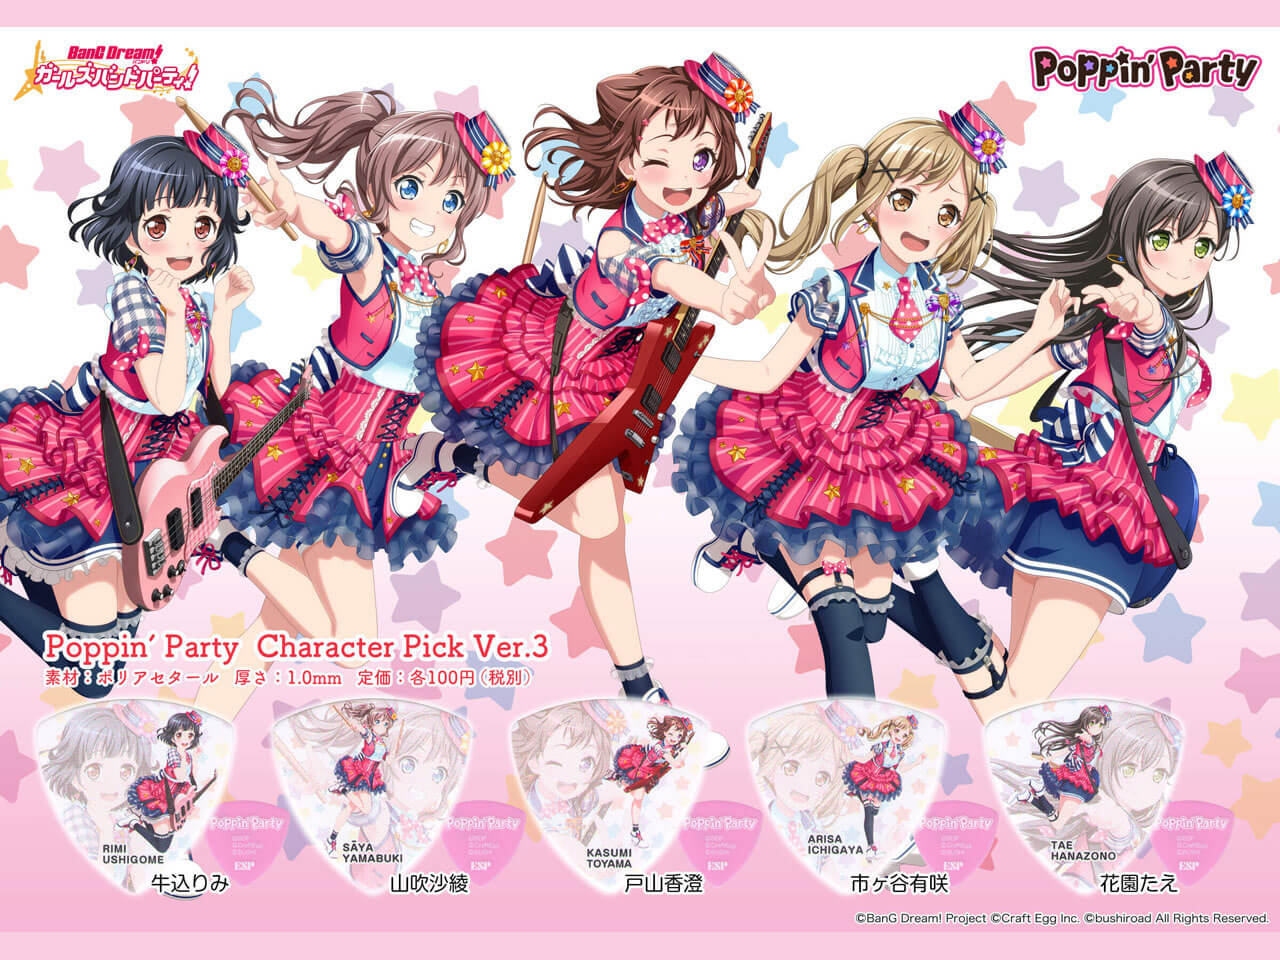 【ESP×BanG Dream!コラボピック】Poppin’Party Character Pick Ver.3 "牛込りみ"10枚セット（GBP Rimi Poppin Party 3）